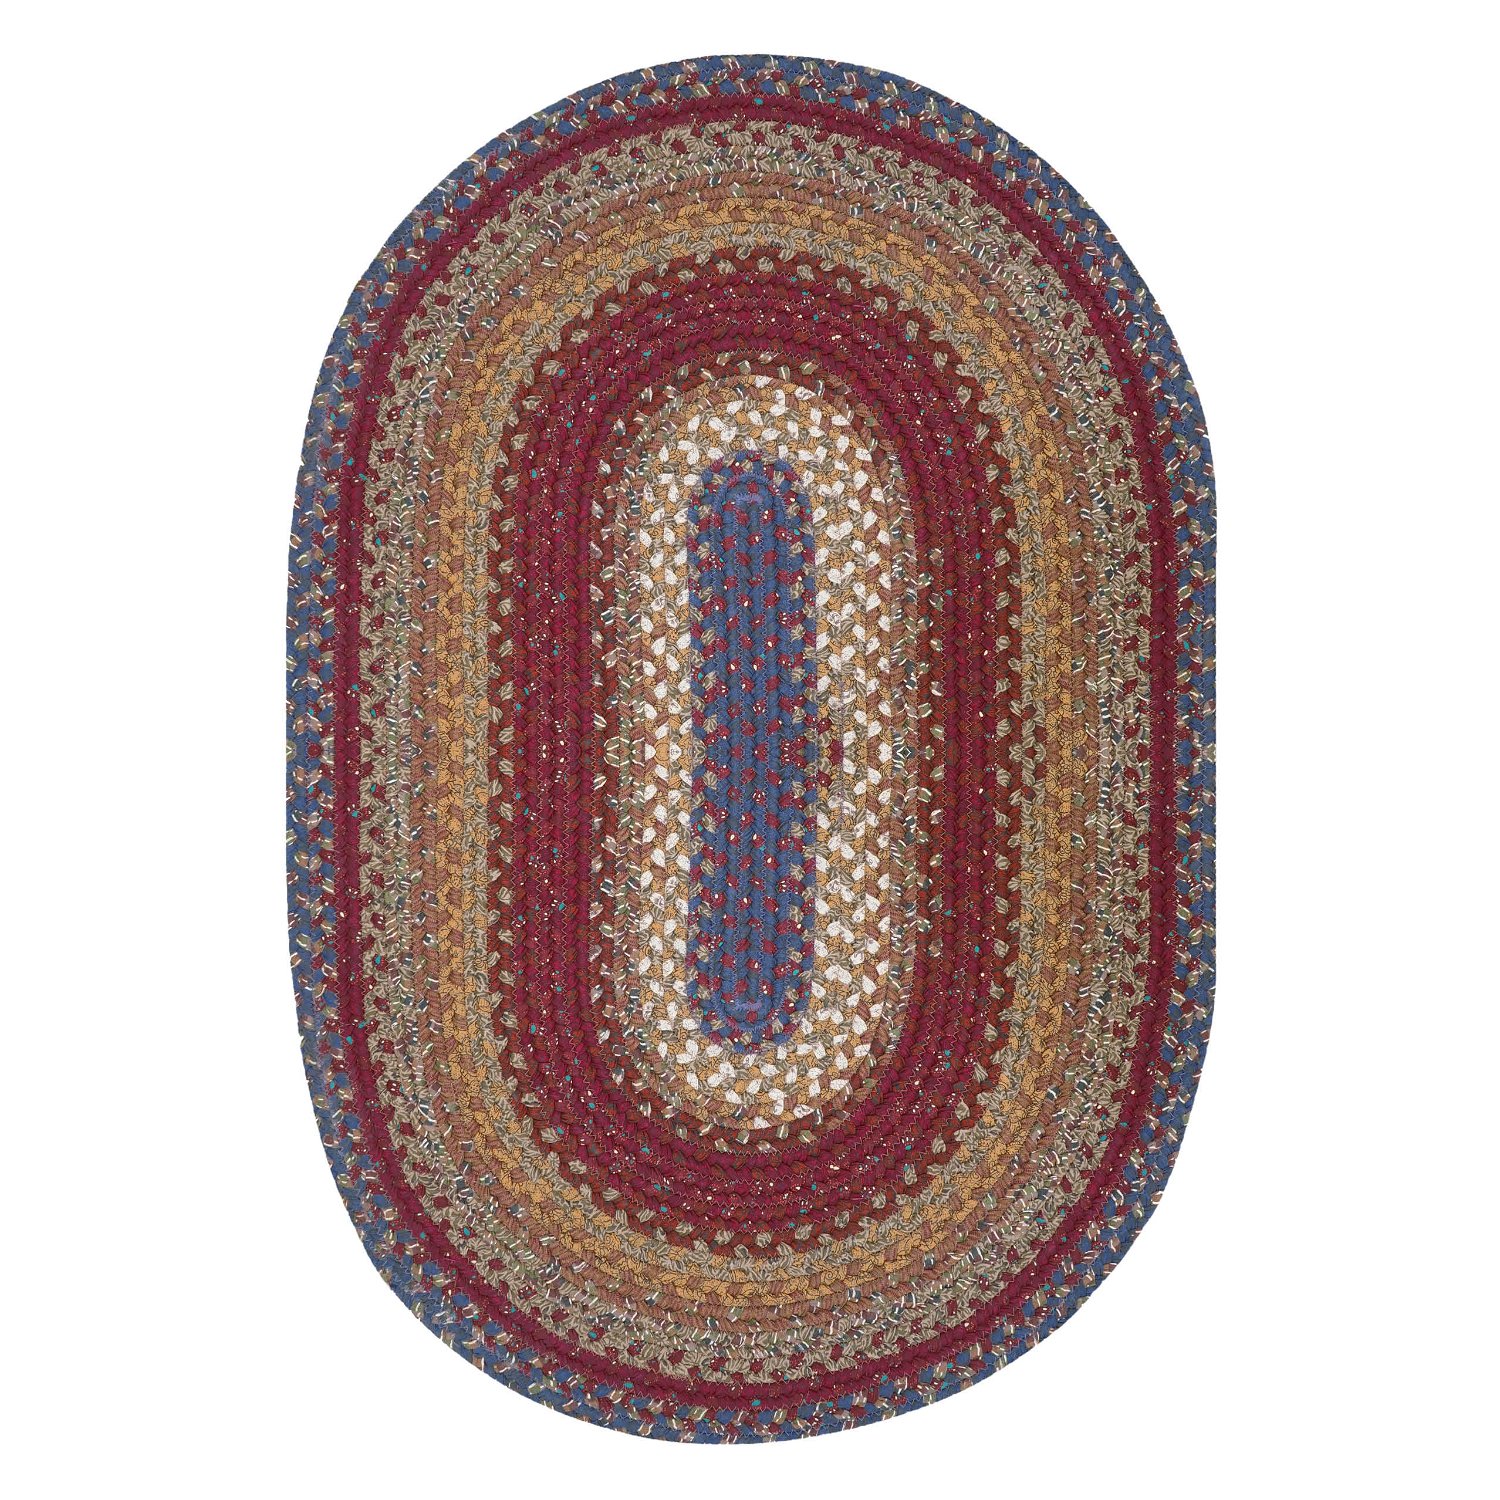 Hand-woven Natural Jute Oval Area Rugs for Kitchen 4 X 6, Braided RAG RUG 5  X 7 for Living Room, Hand-knotted Bedroom Area Rugs 3 X 5 